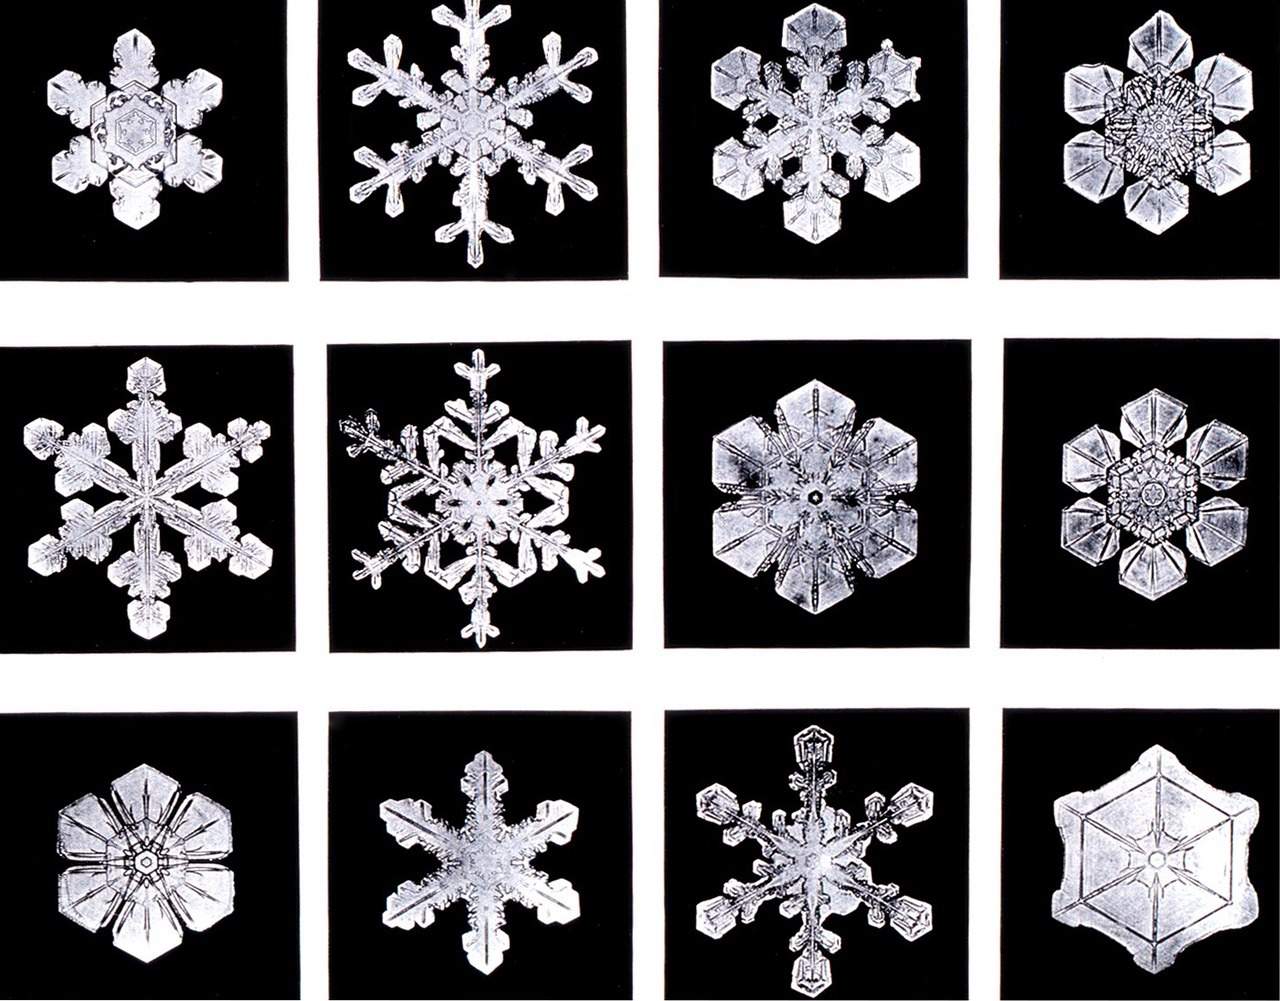 Fig. 2: Example of different snow crystals; Source: Wikipedia